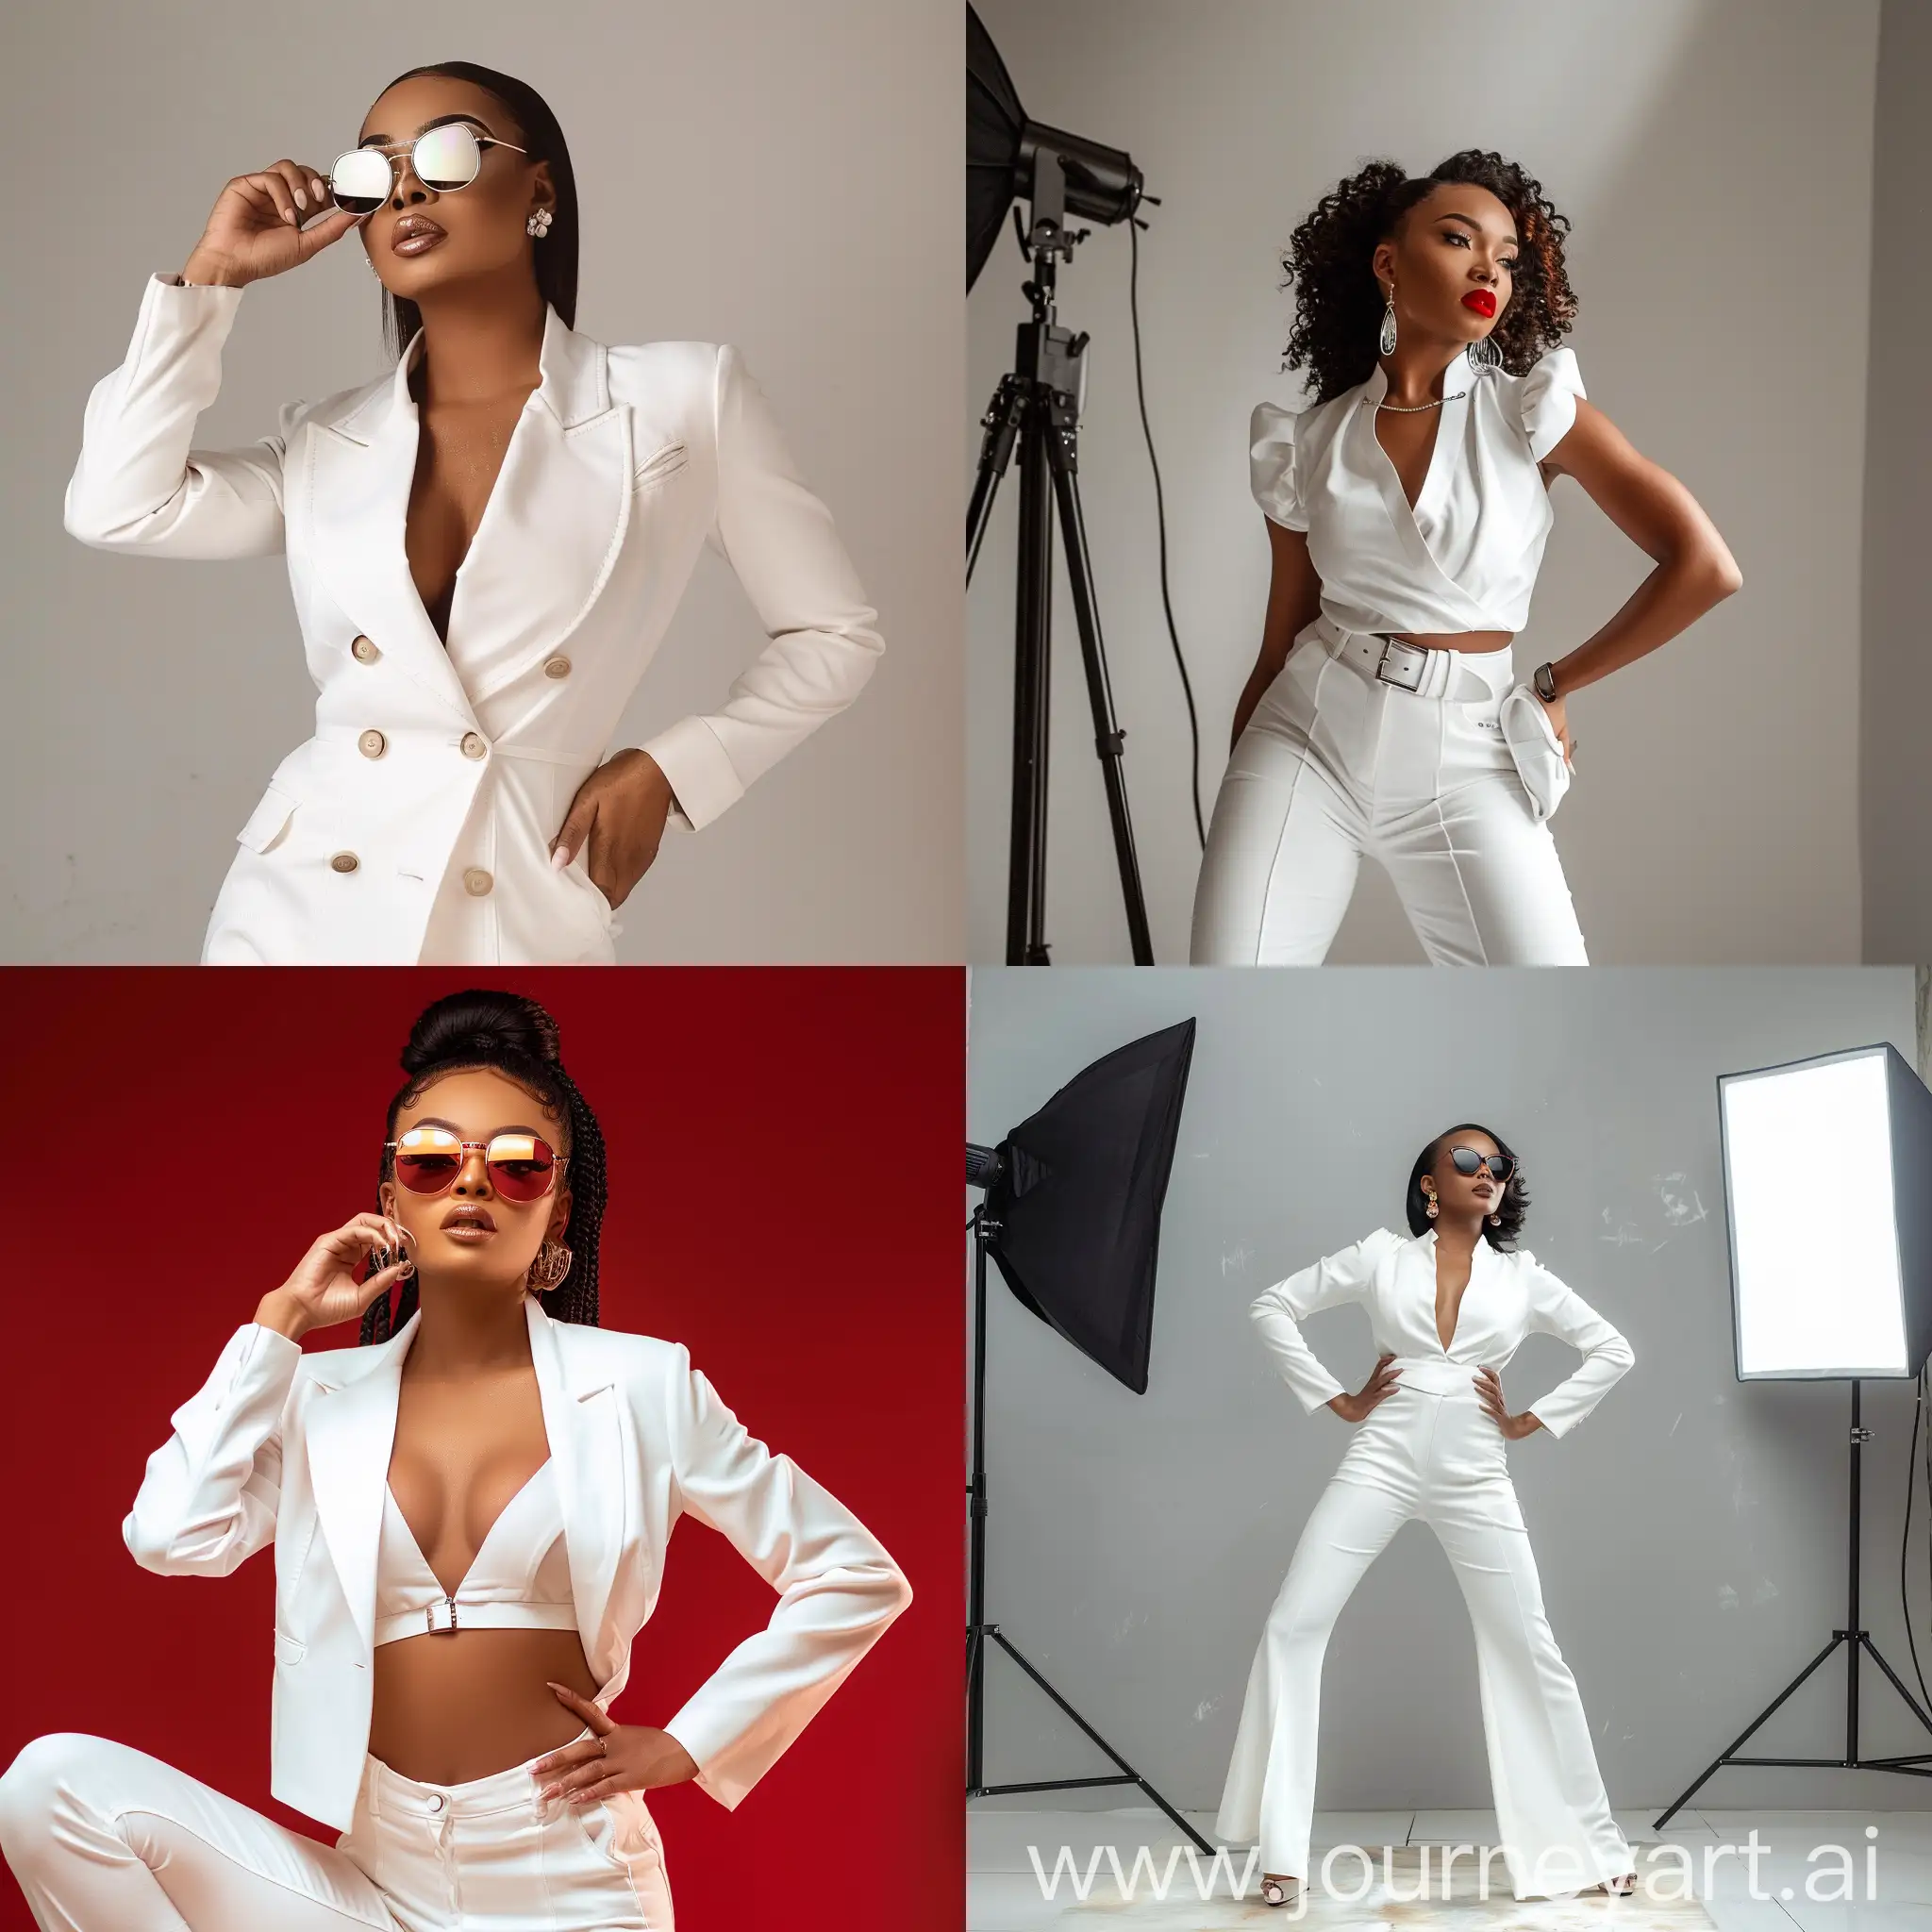 A stylish woman in white striking boss poses during a studio photoshoot, --sref https://i.pinimg.com/564x/be/c8/7e/bec87e168090b442541f3c560c1ce8ed.jpg --sw 0